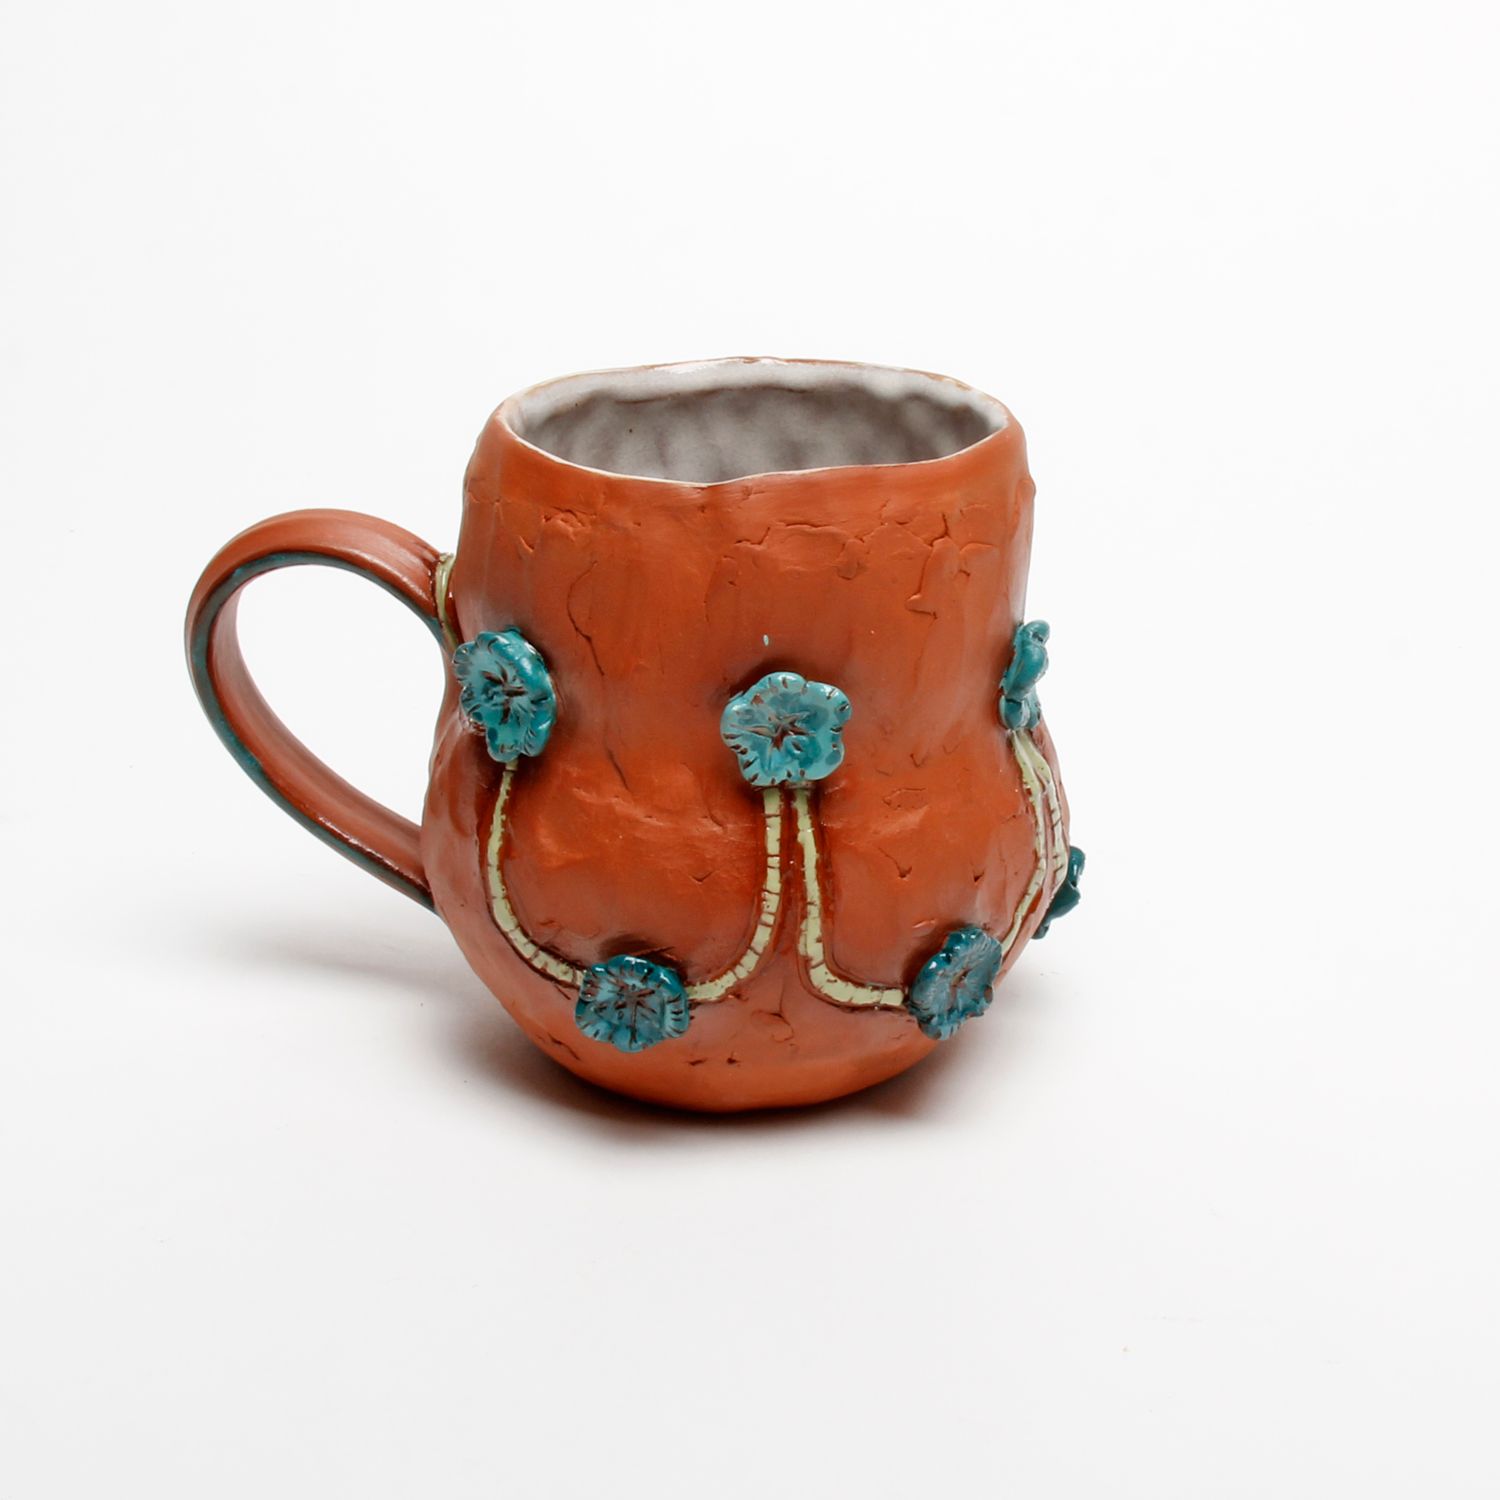 Zoë Pinnell: Tall Mug – Assorted Motifs Product Image 2 of 6